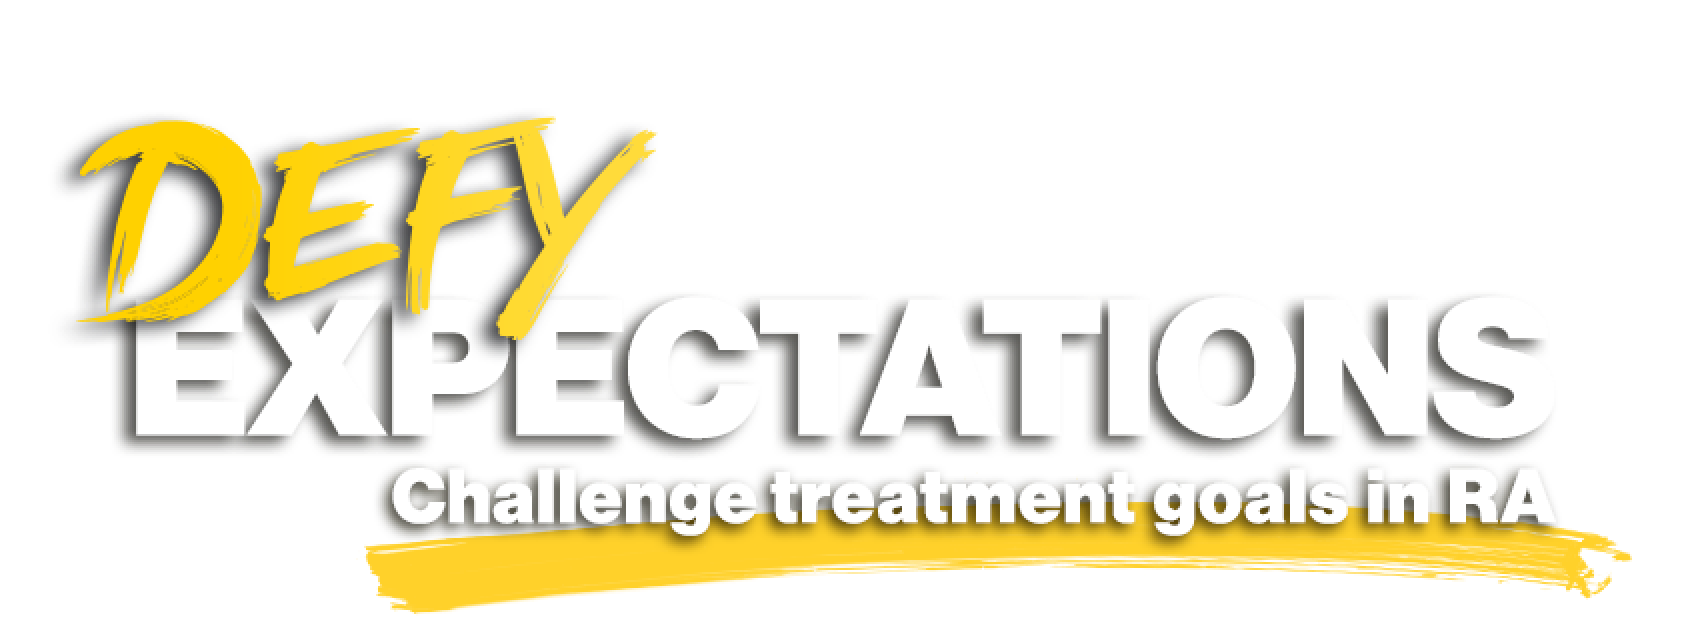 Defy Expectations - Challenge treatment goals in RA